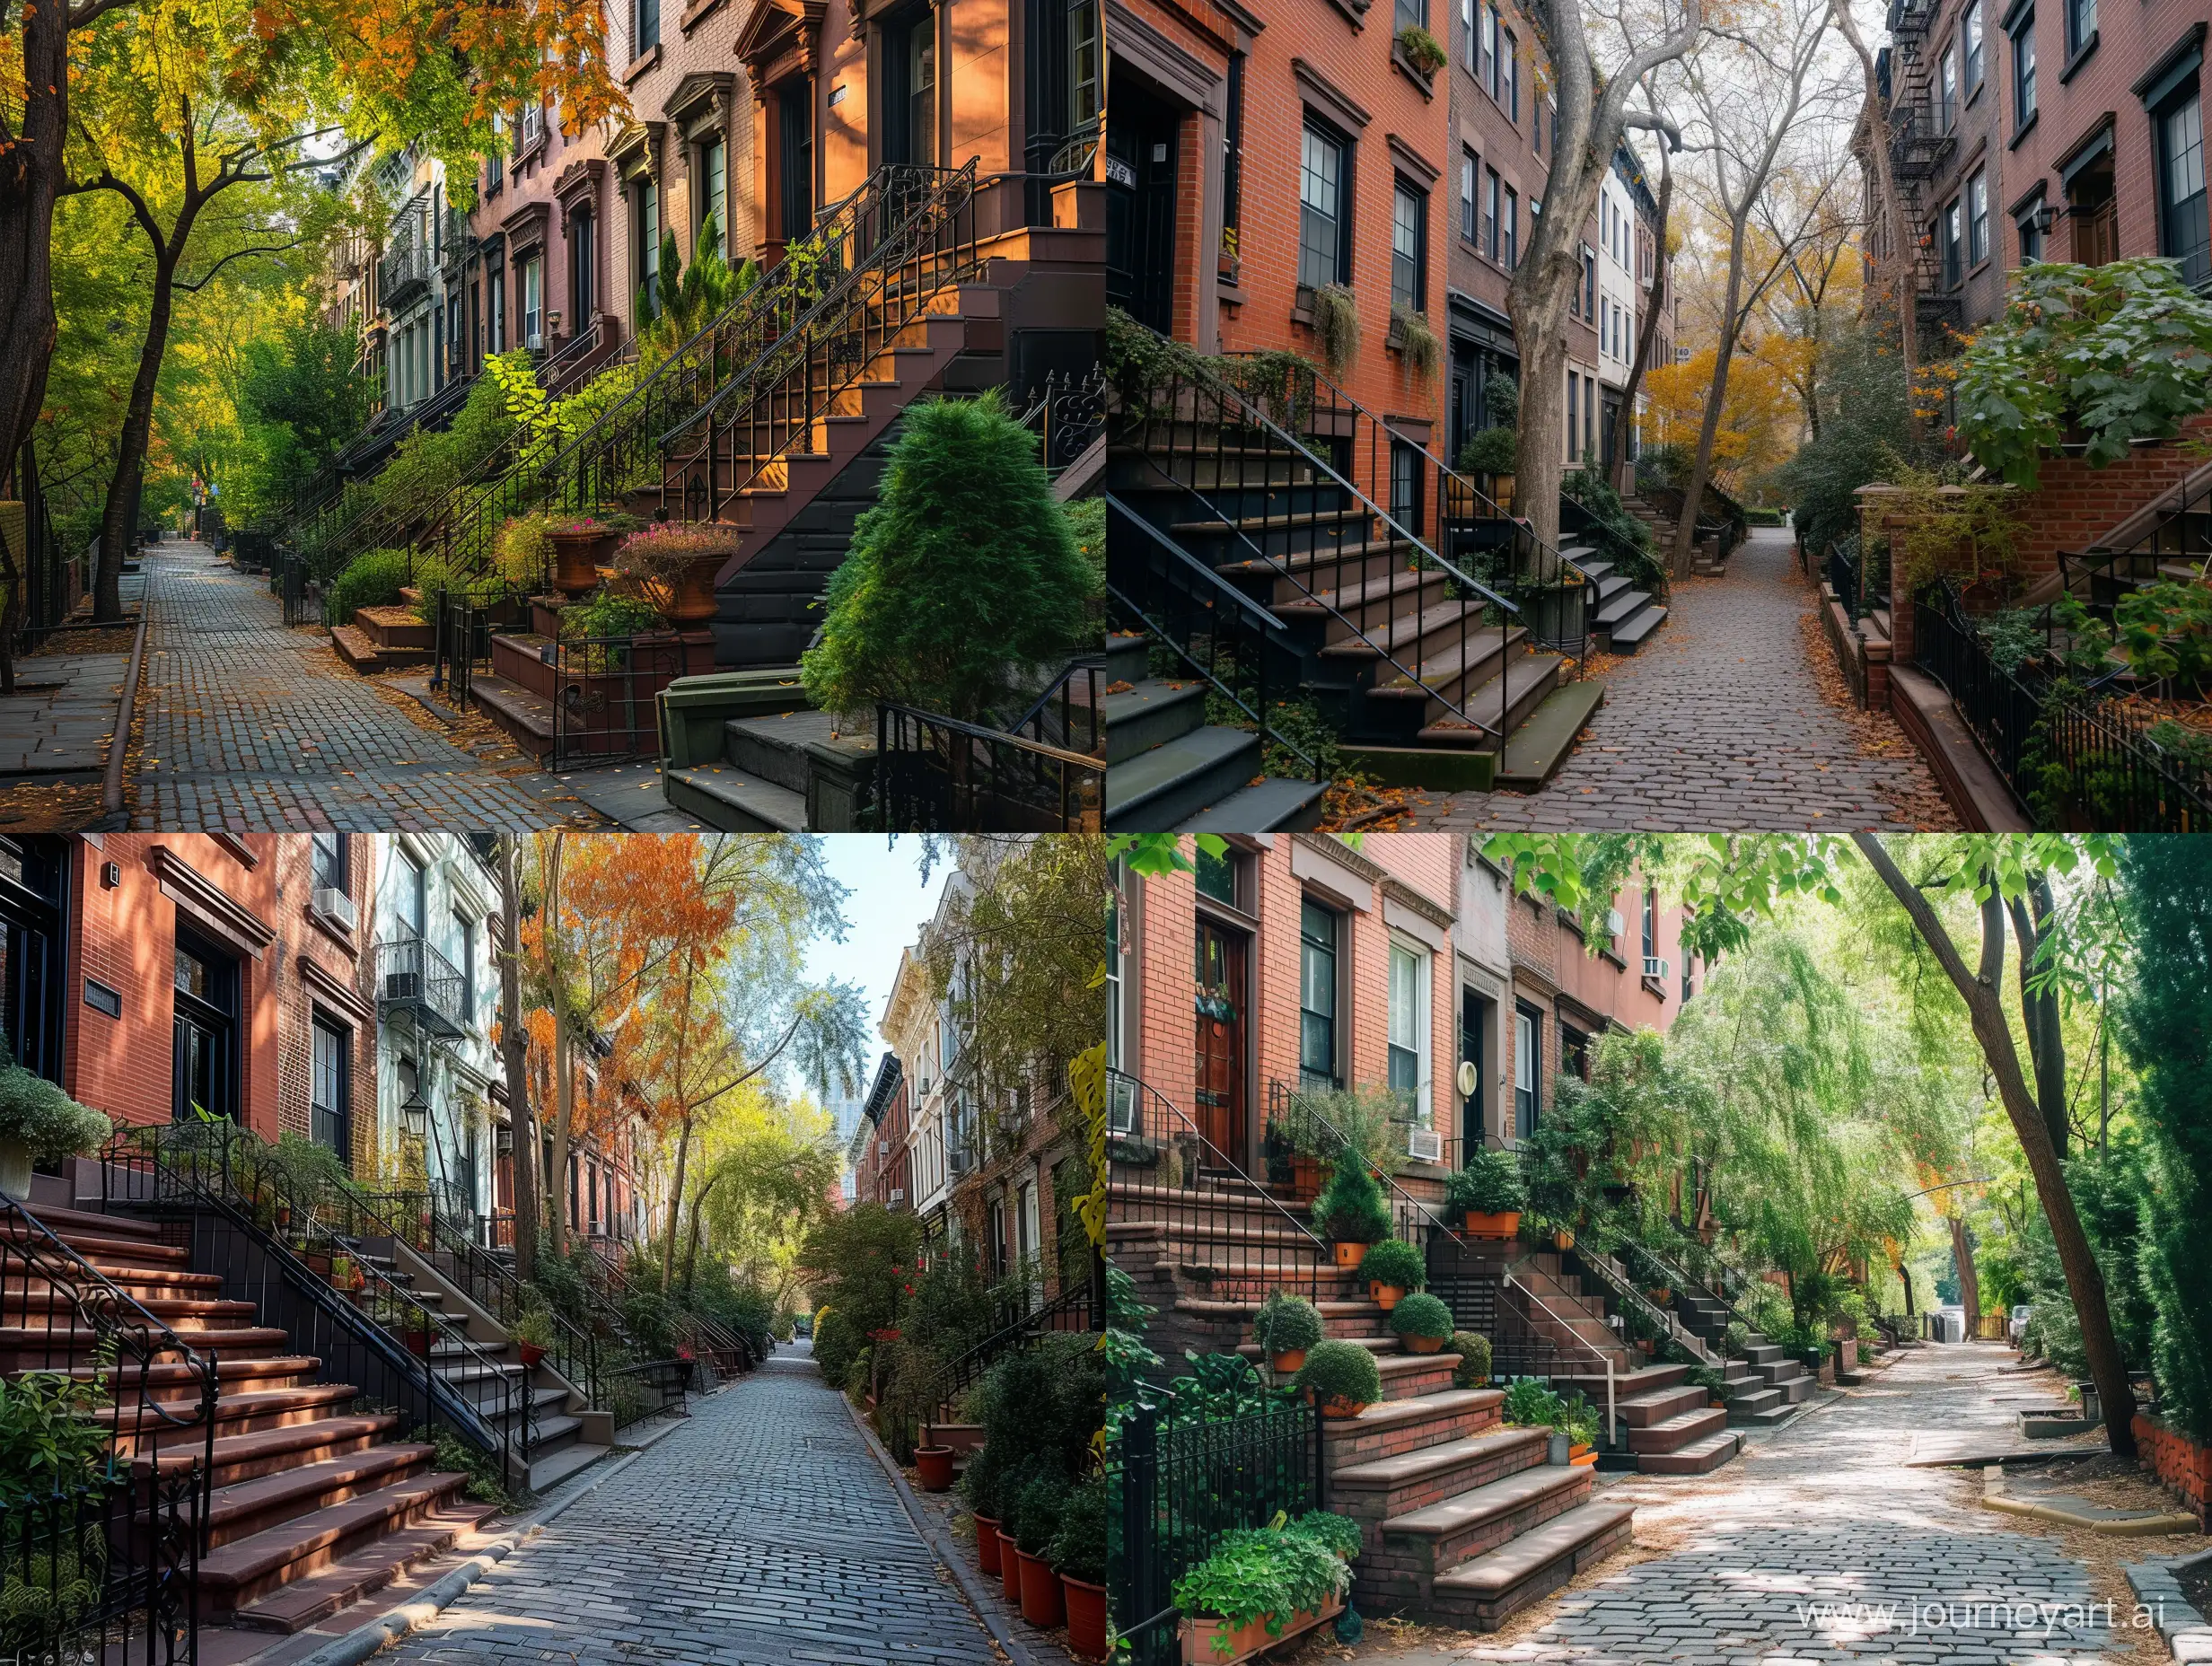 Charming-Brick-Houses-Lining-the-Streets-of-New-York-City